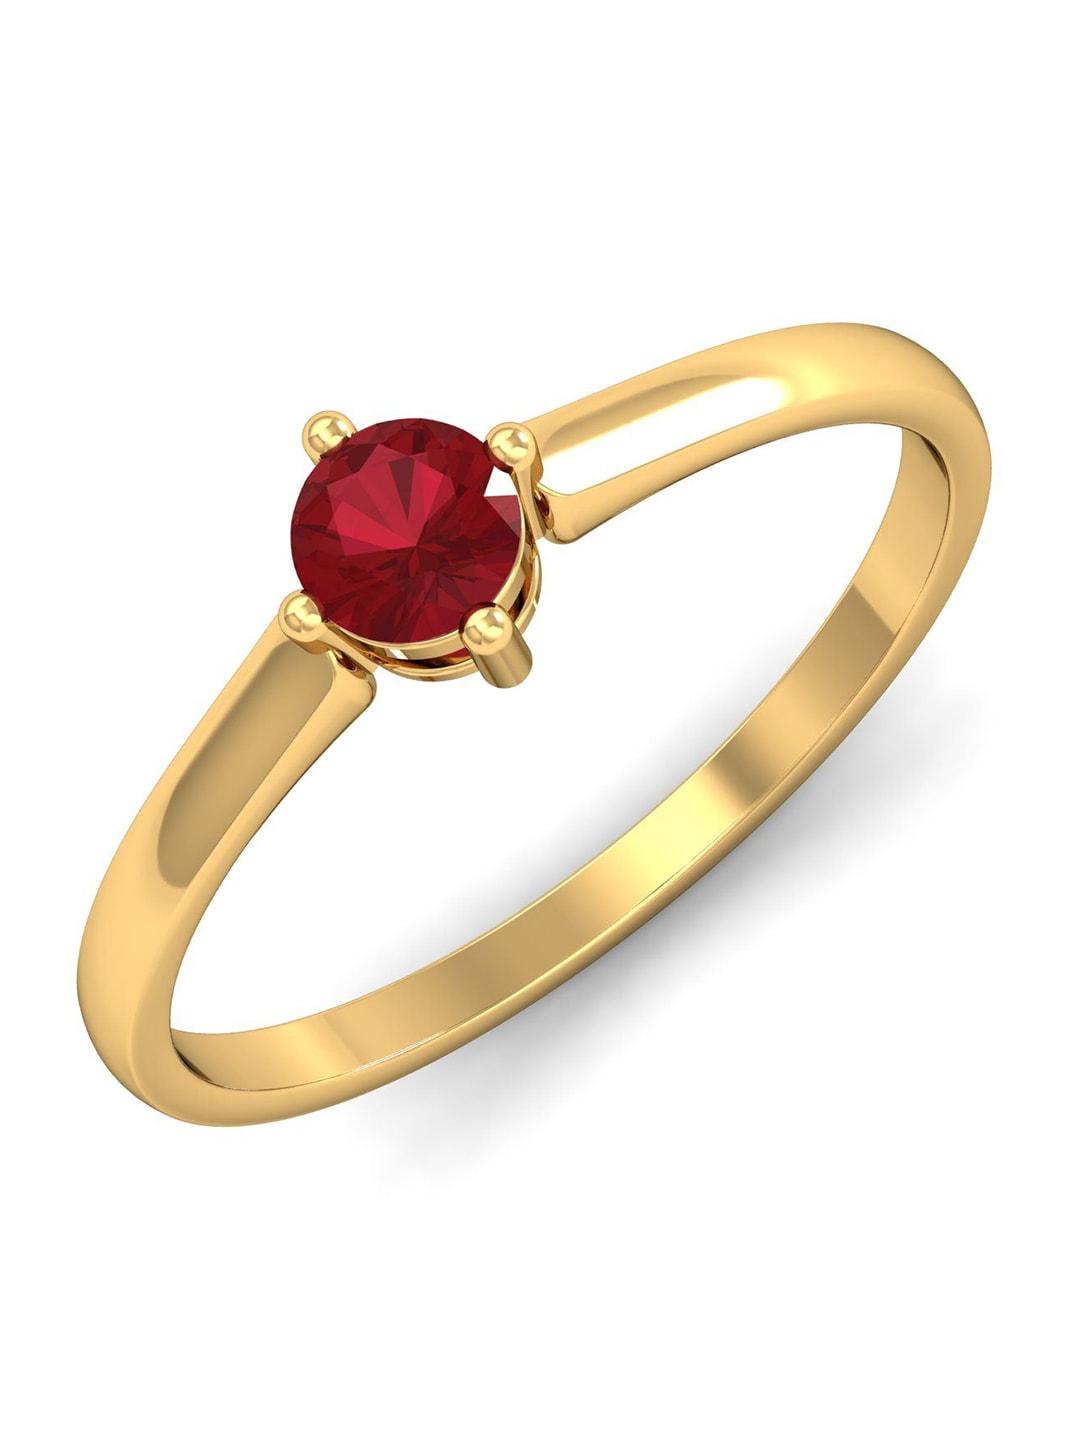 kuberbox 18kt gold ruby studded ring - 1.8 g